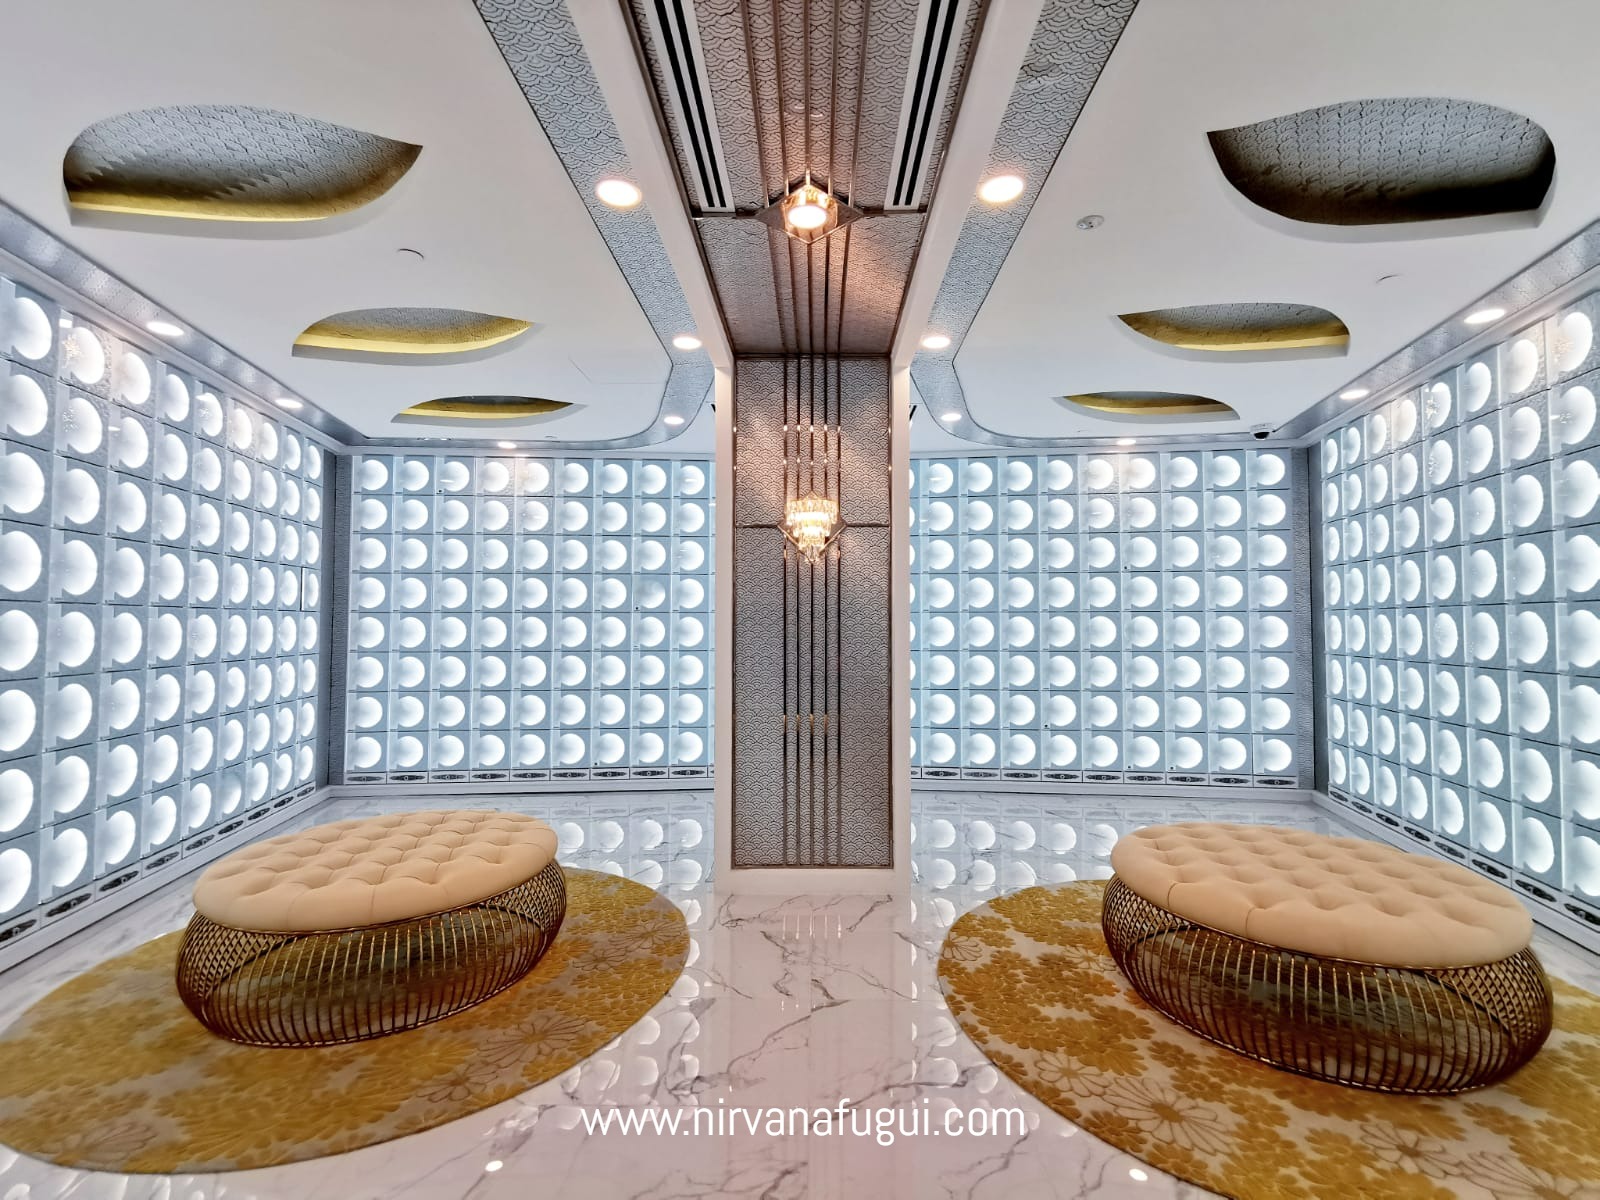 This columbarium is suitable for any religion, which includes Christian, Catholic, Free-thinker, Buddhist or Taoist.